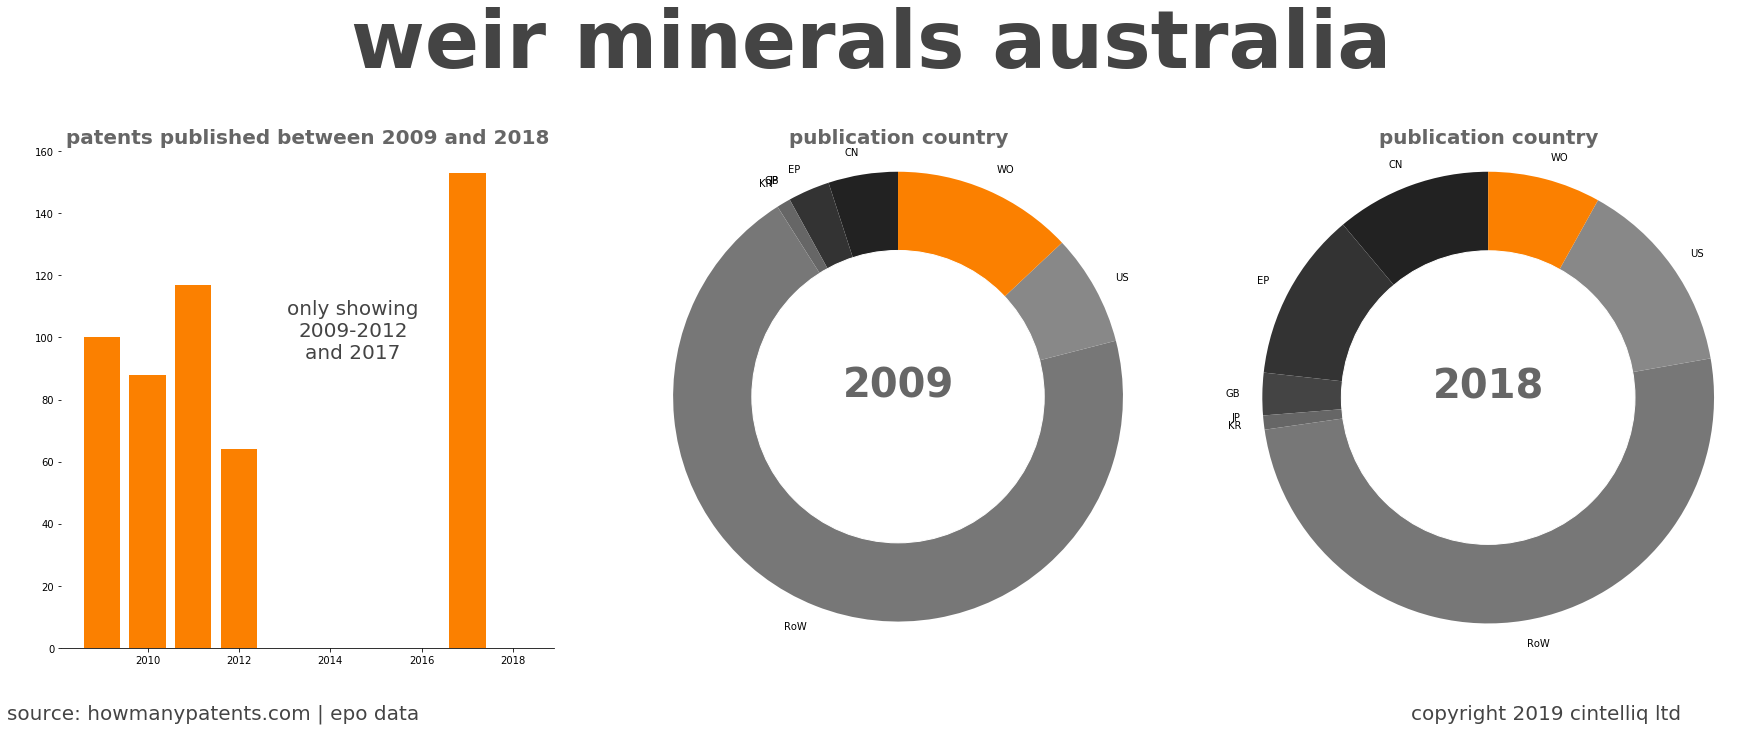 summary of patents for Weir Minerals Australia